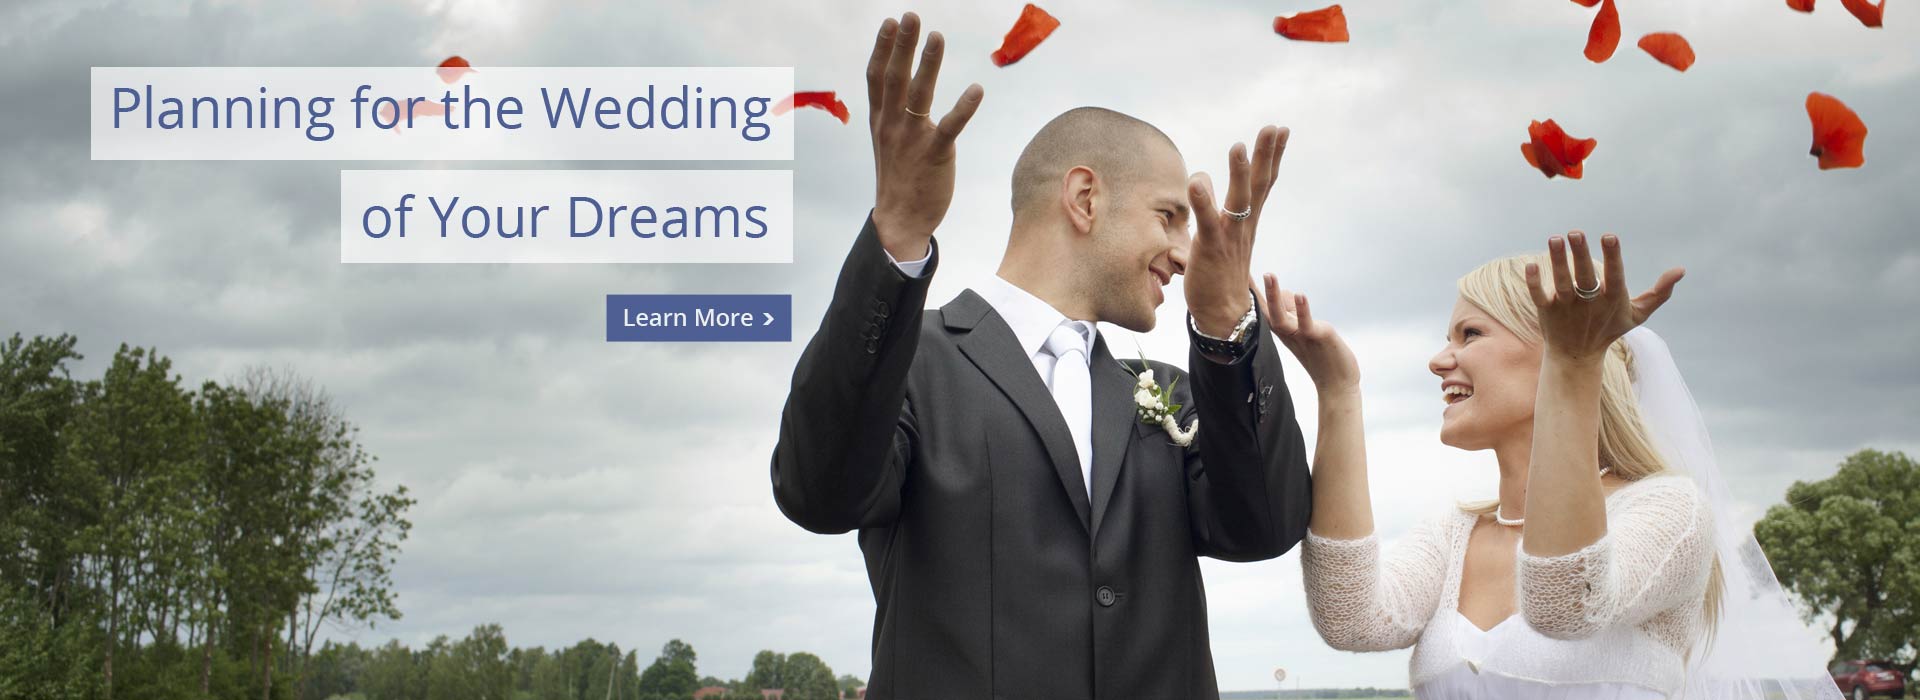 Planning for the wedding of your dreams